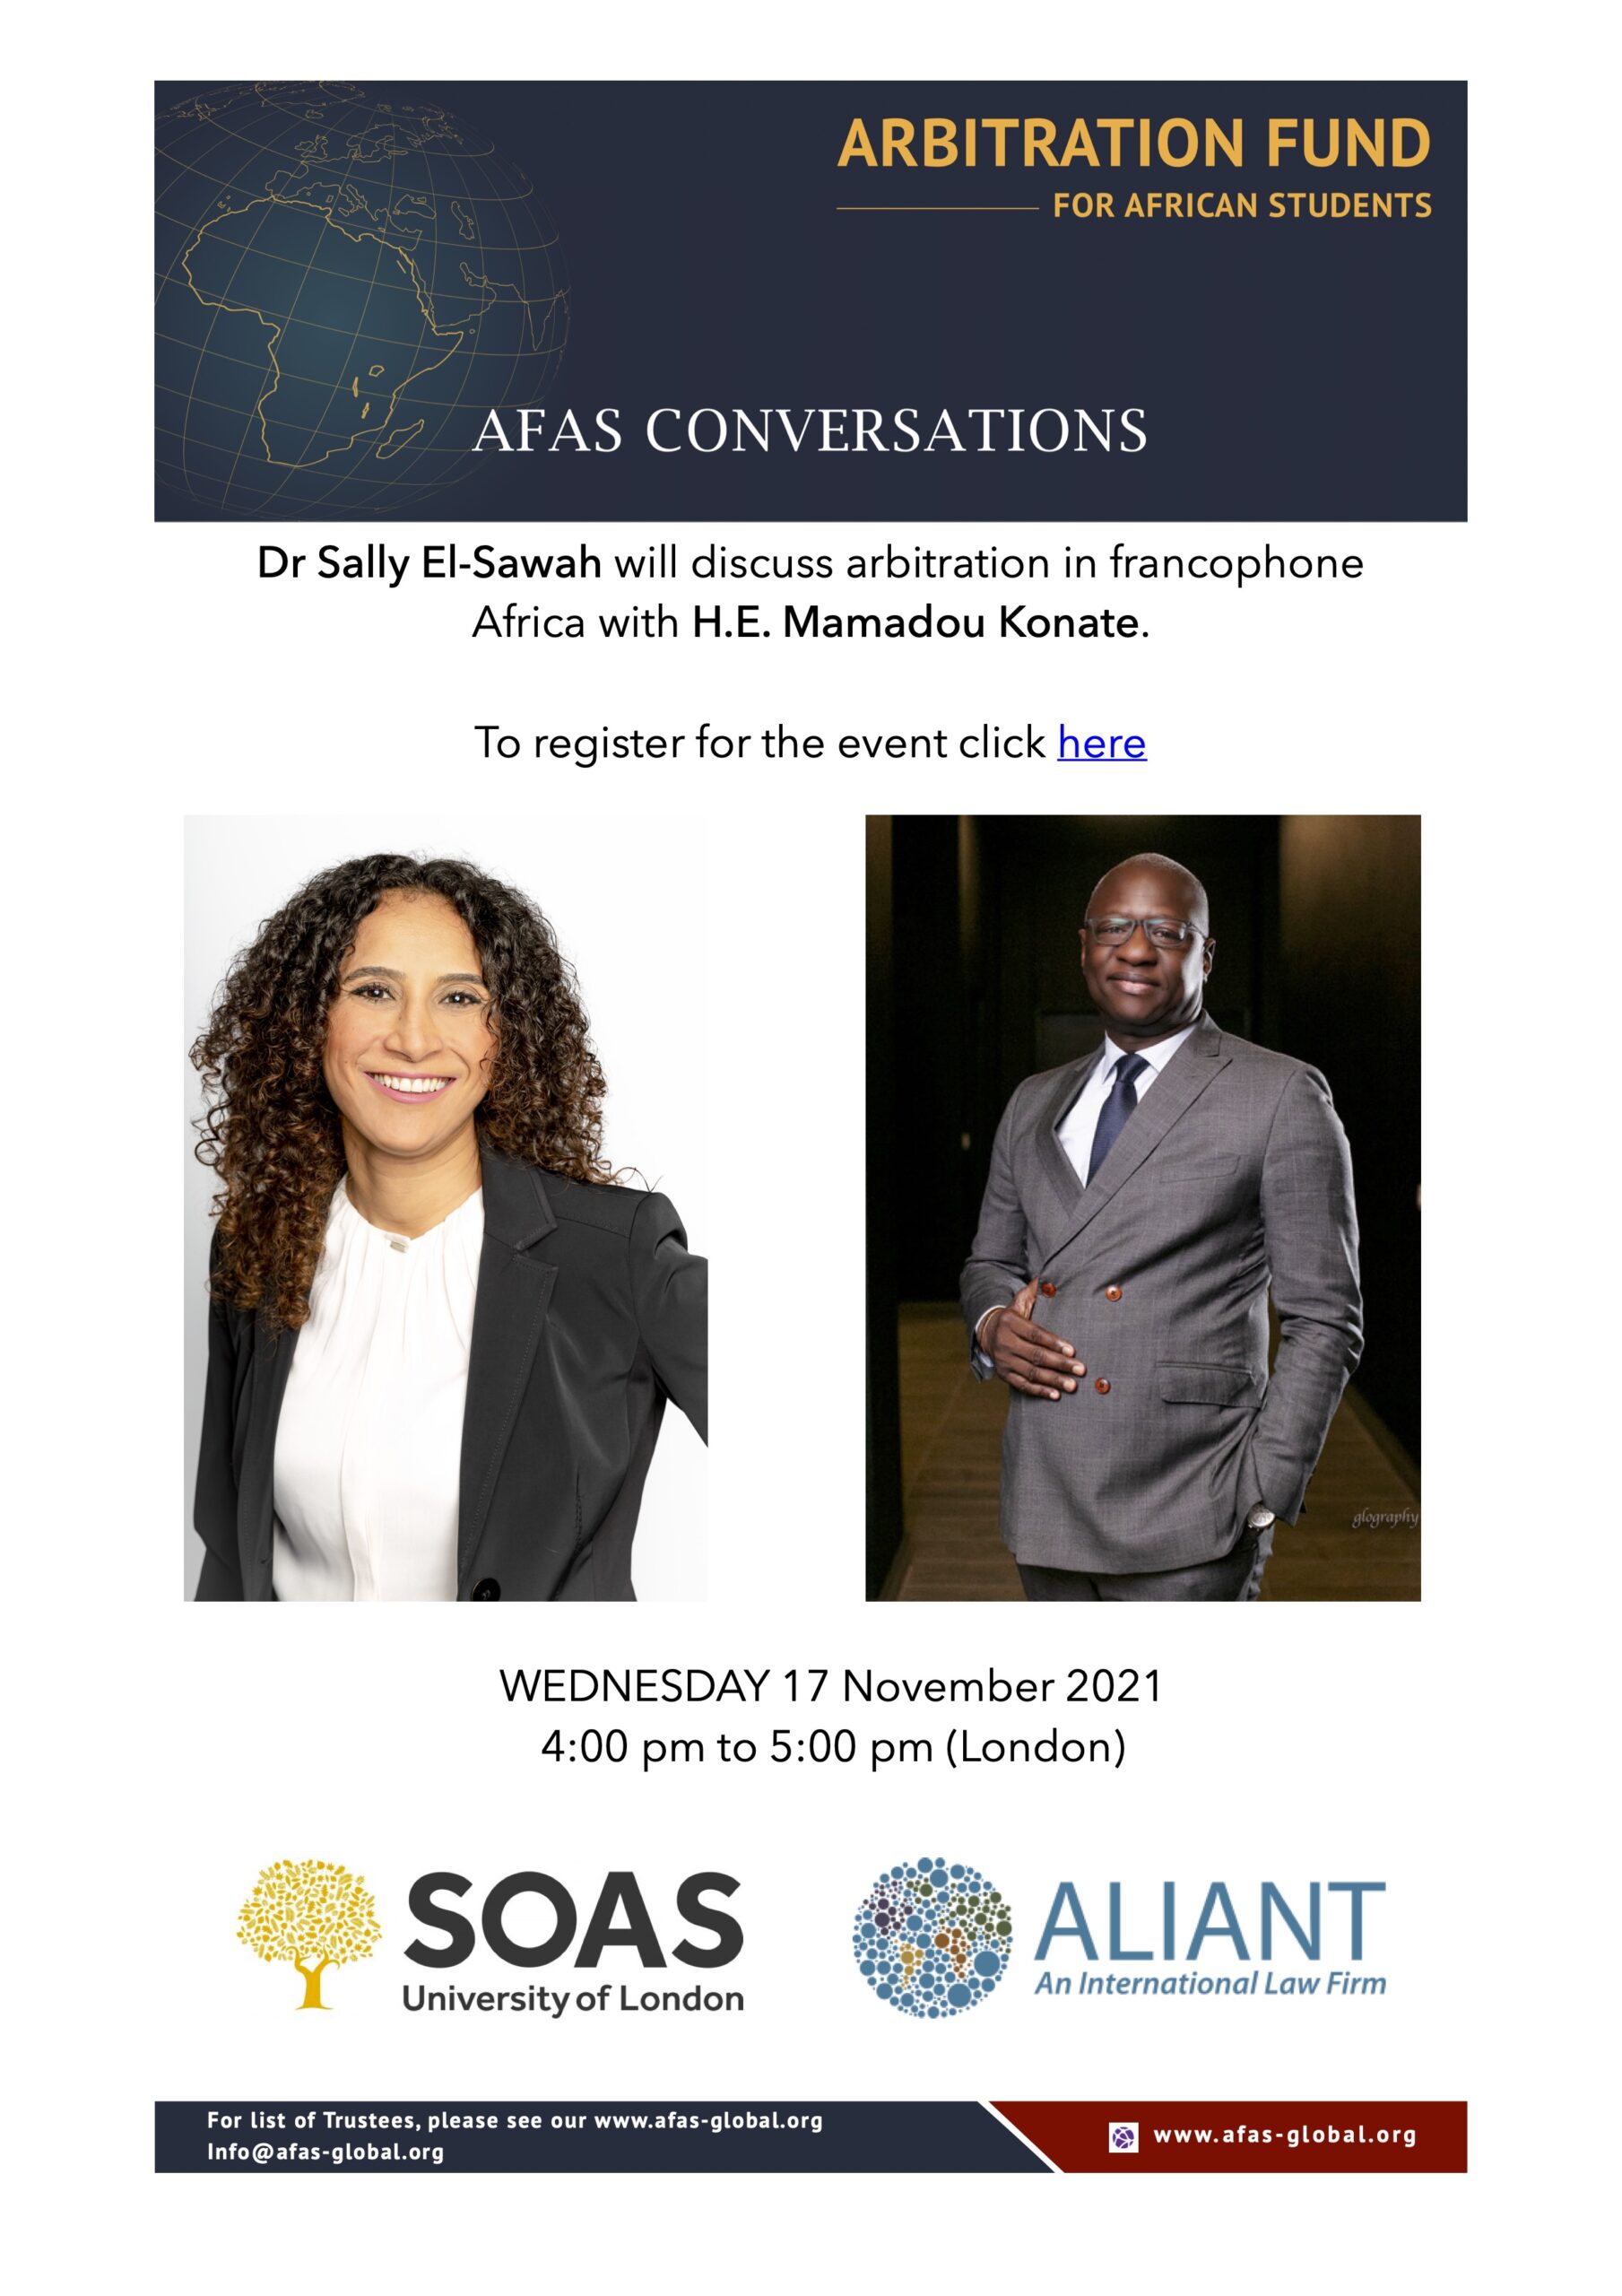 17 November: Dr Sally El Sawah will be in conversation with Mamadou Konate on arbitration in francophone Africa.